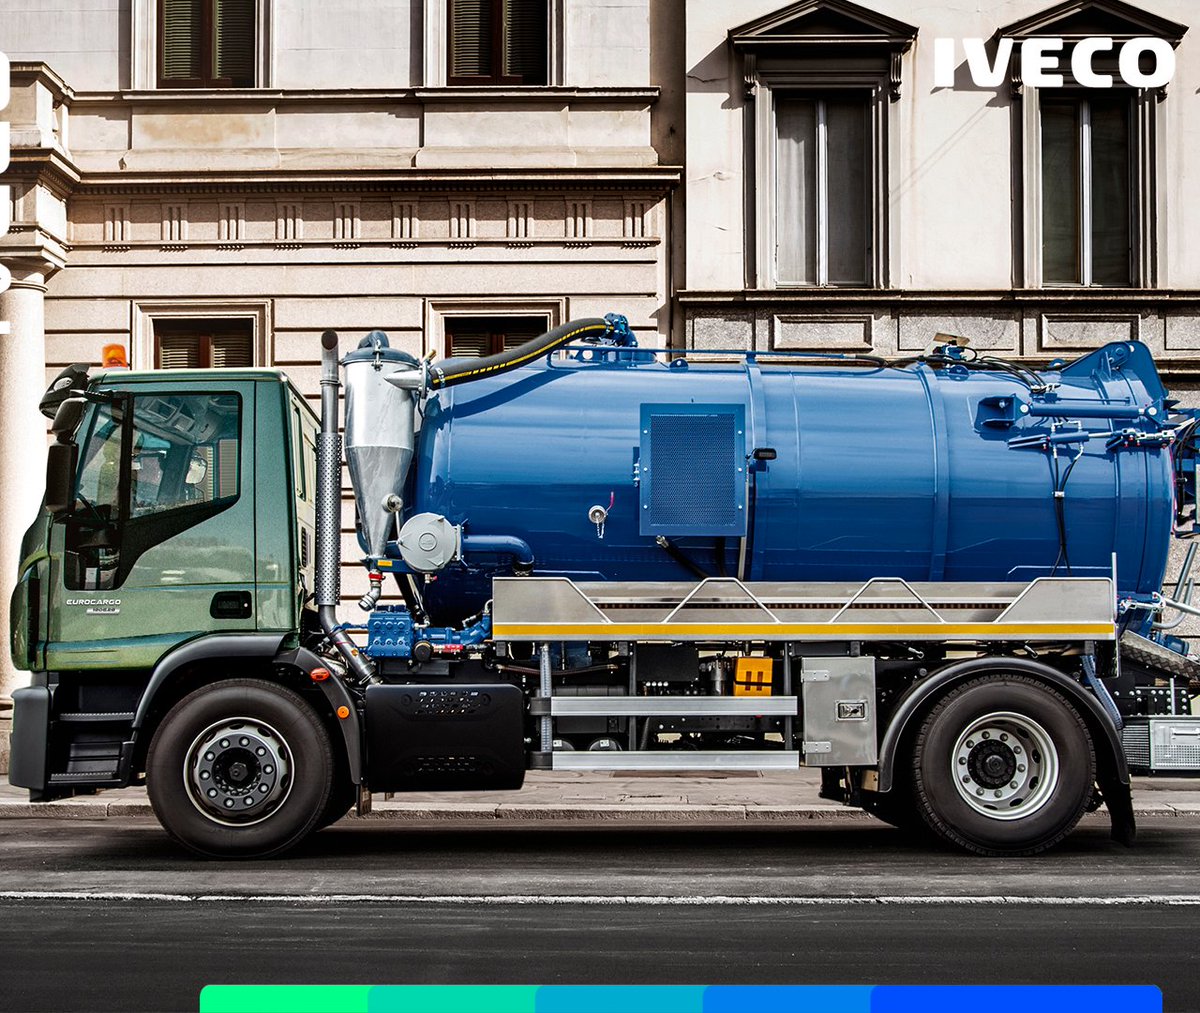 Mean, green, biomethane machine. Did you know that the new @IVECO Eurocargo emits 95% less CO2 than an equivalent diesel truck when run on biomethane. #environment #technology